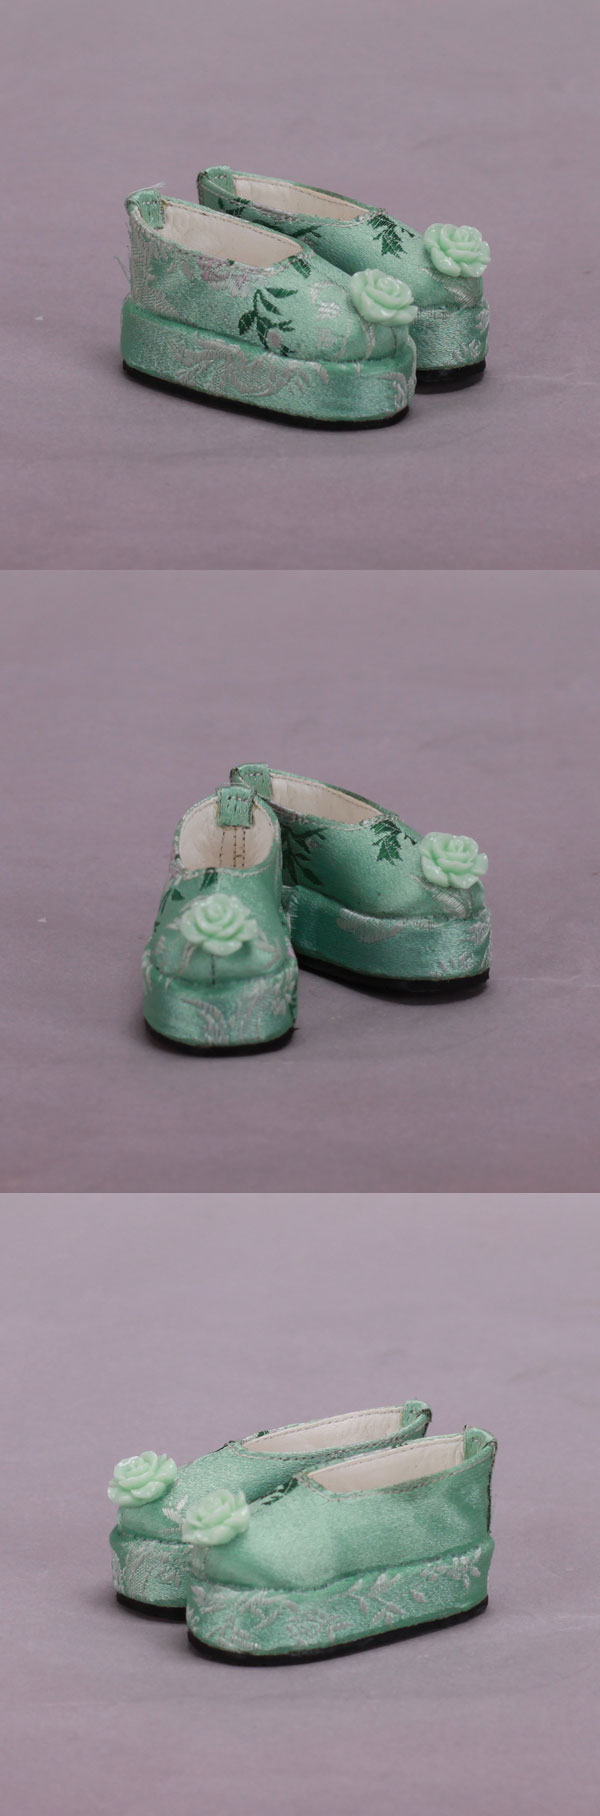 BJD Shoes S-410 for MSD Ball-jointed Doll